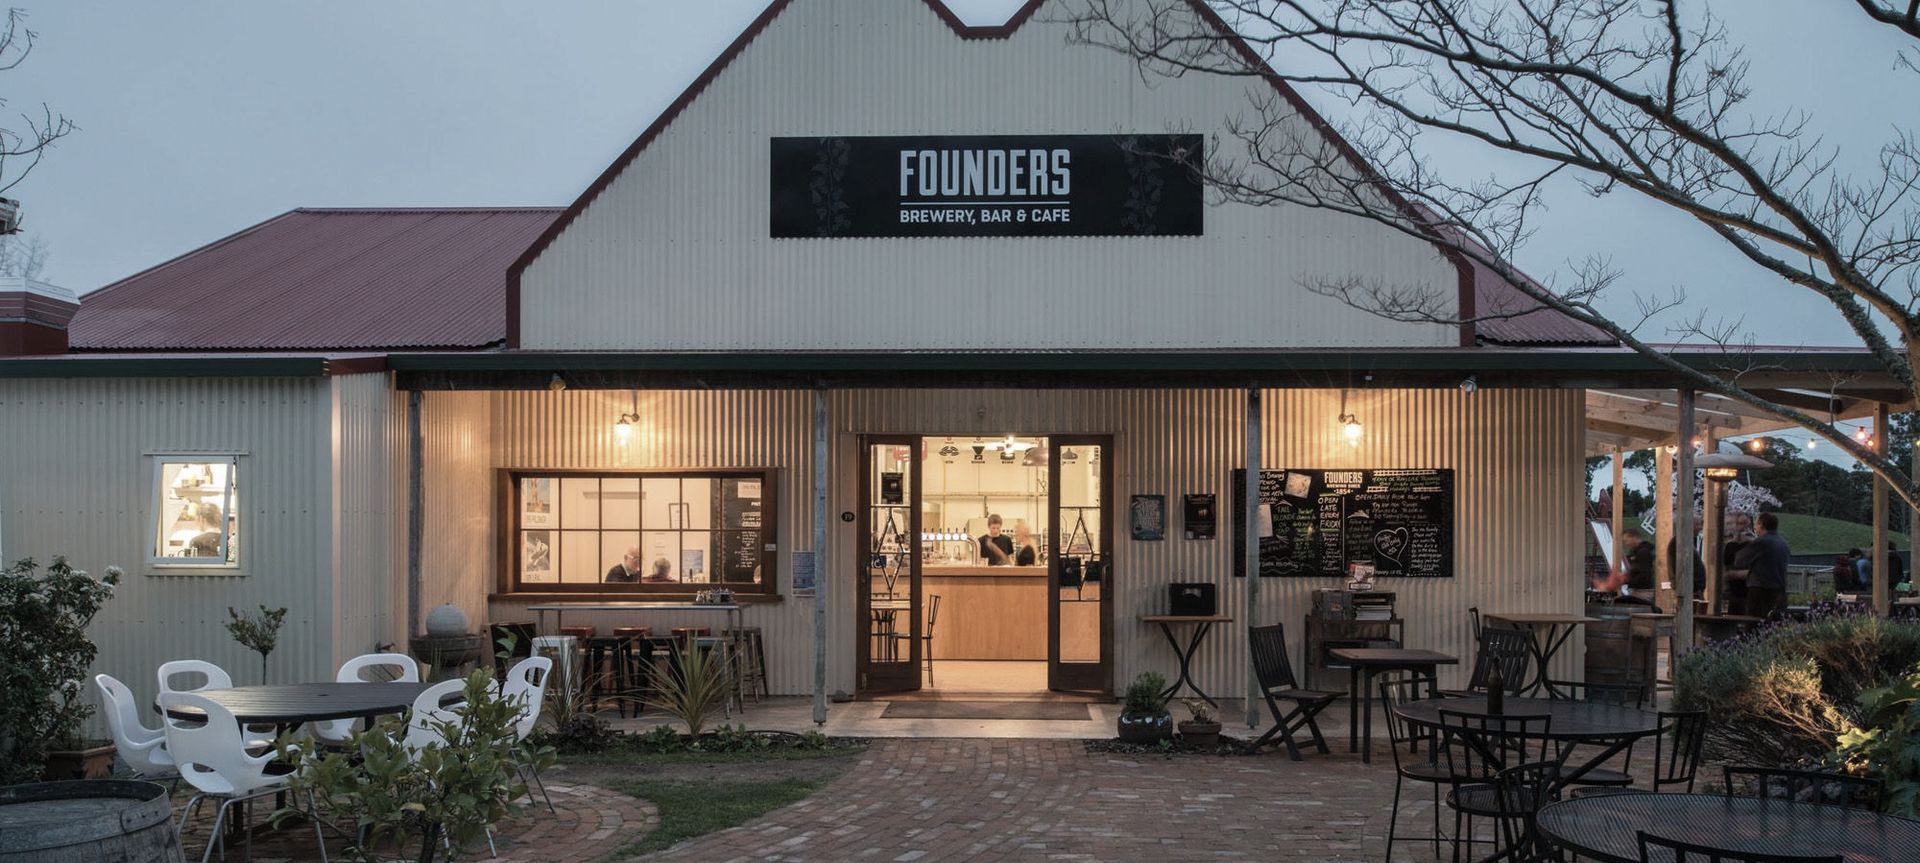 Founders Brewery Cafe & Bar banner